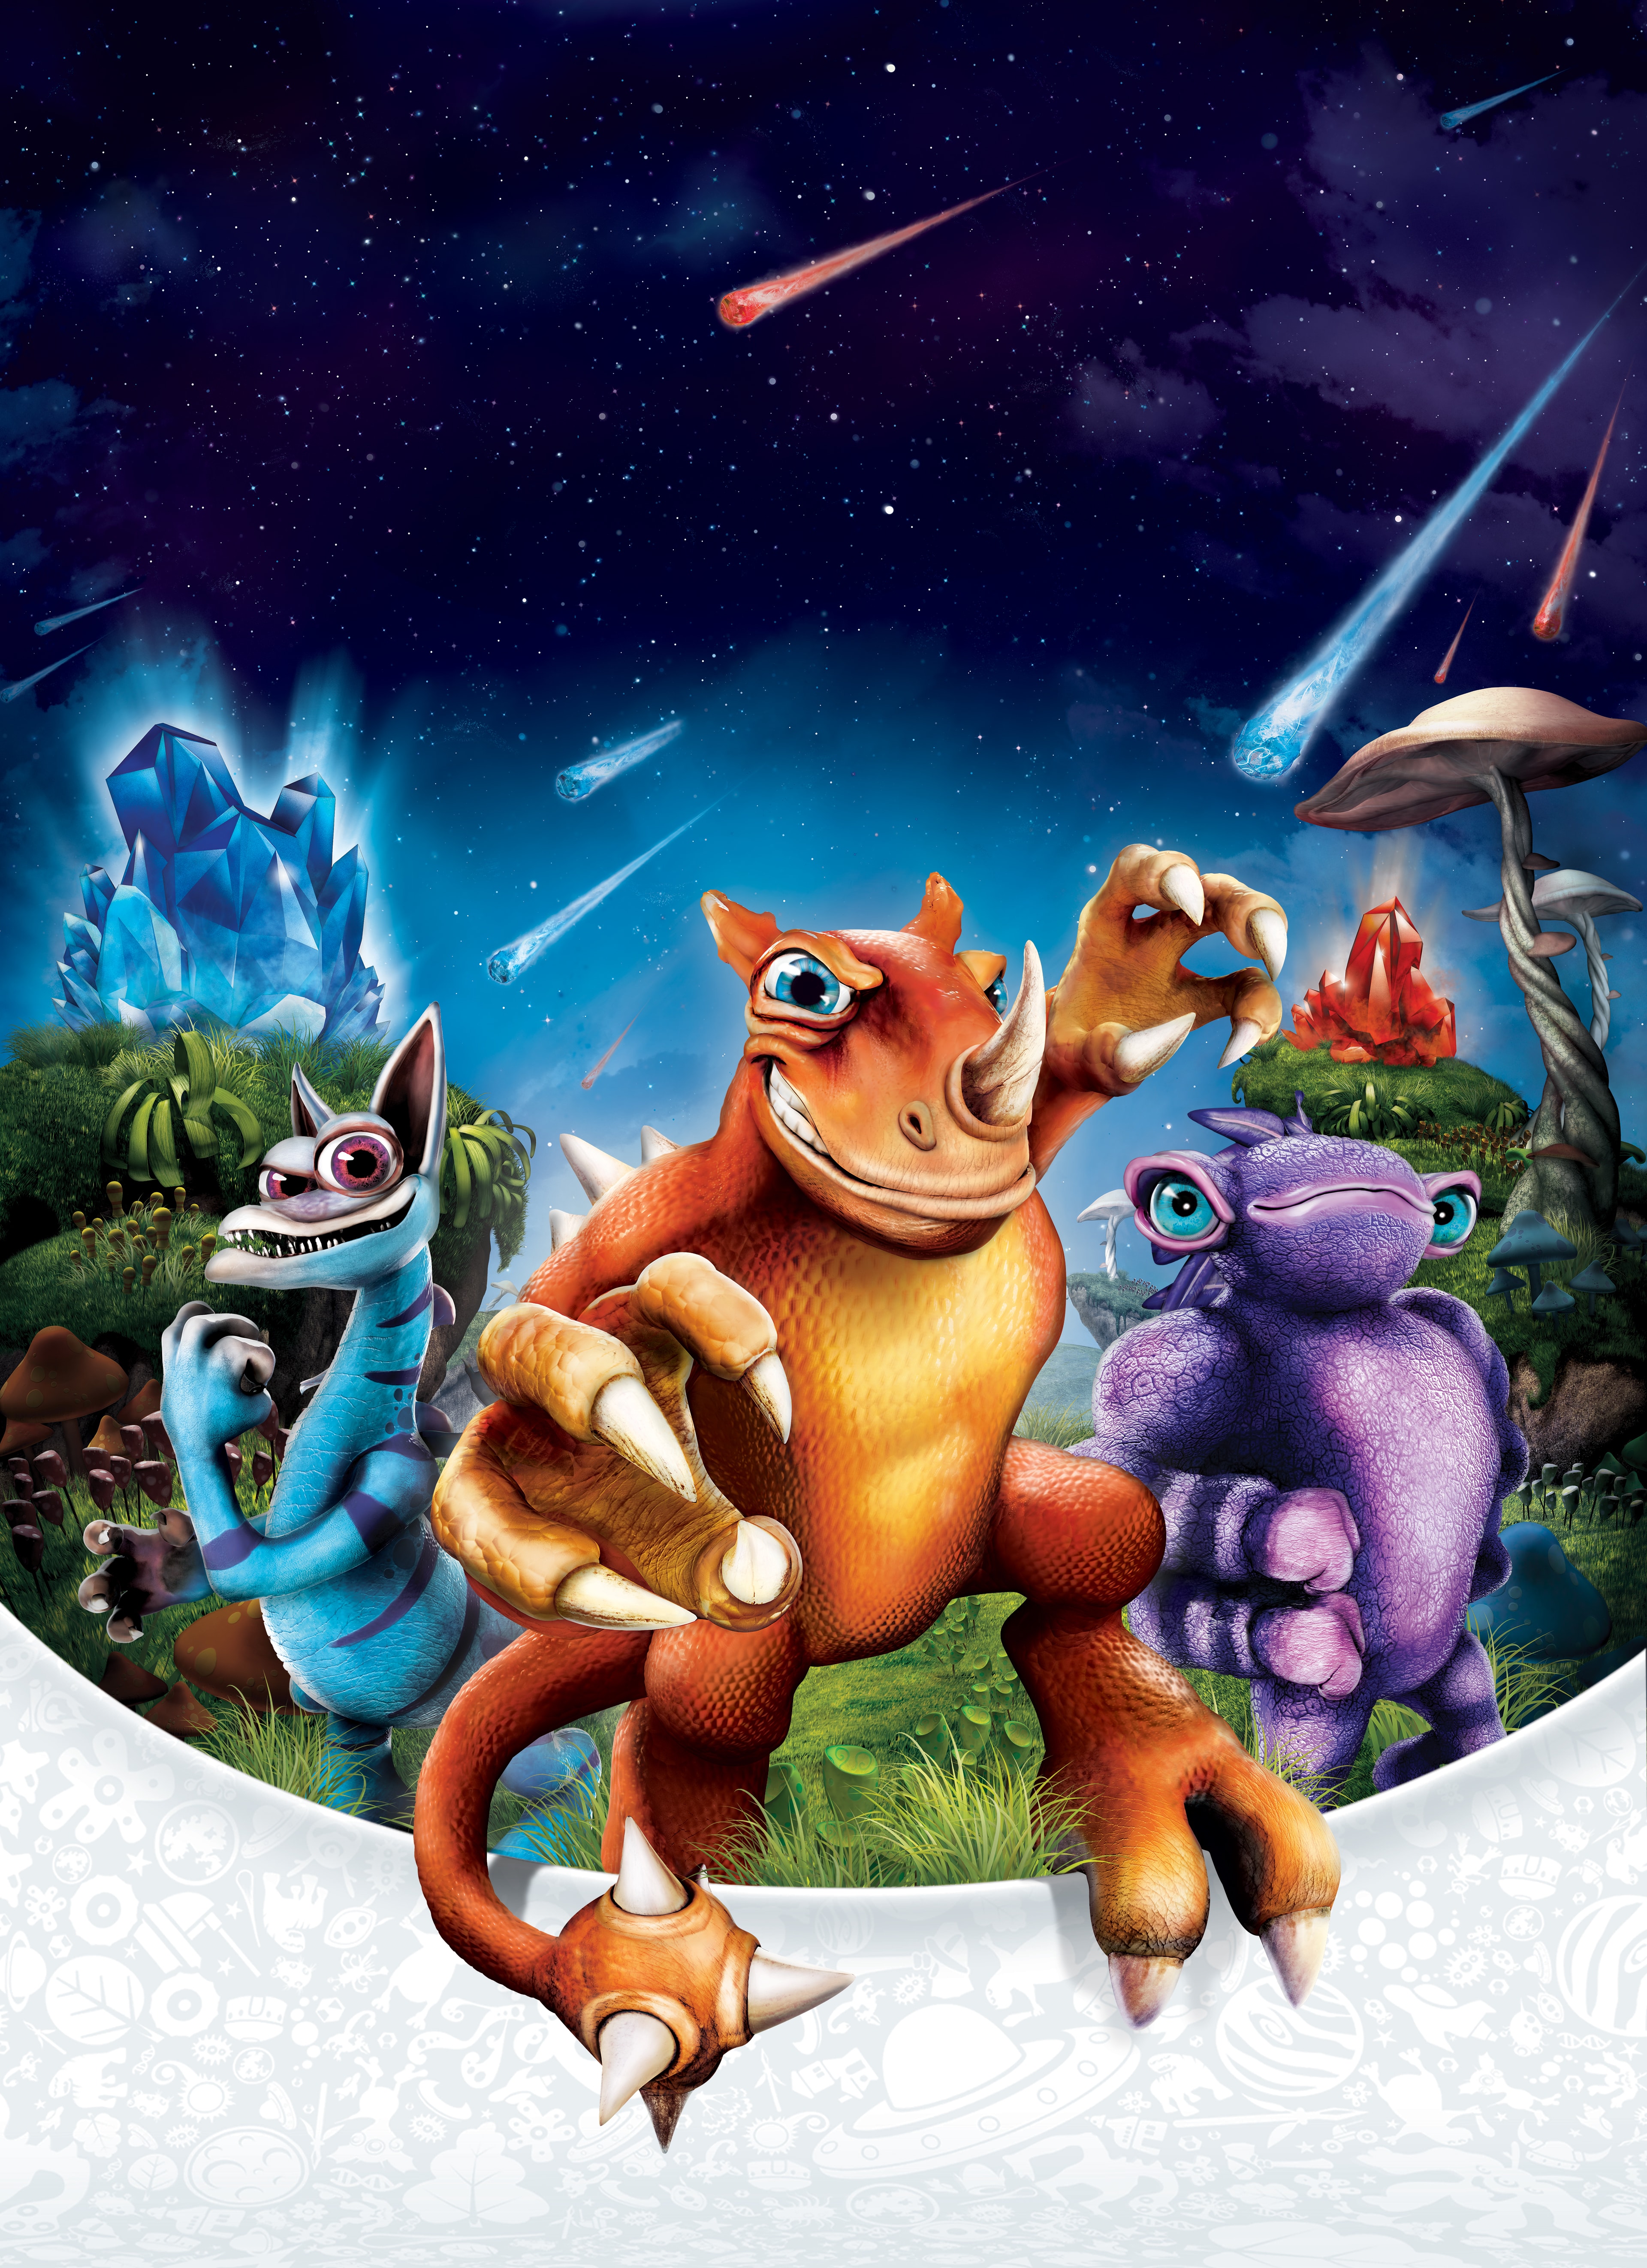 download spore for free online